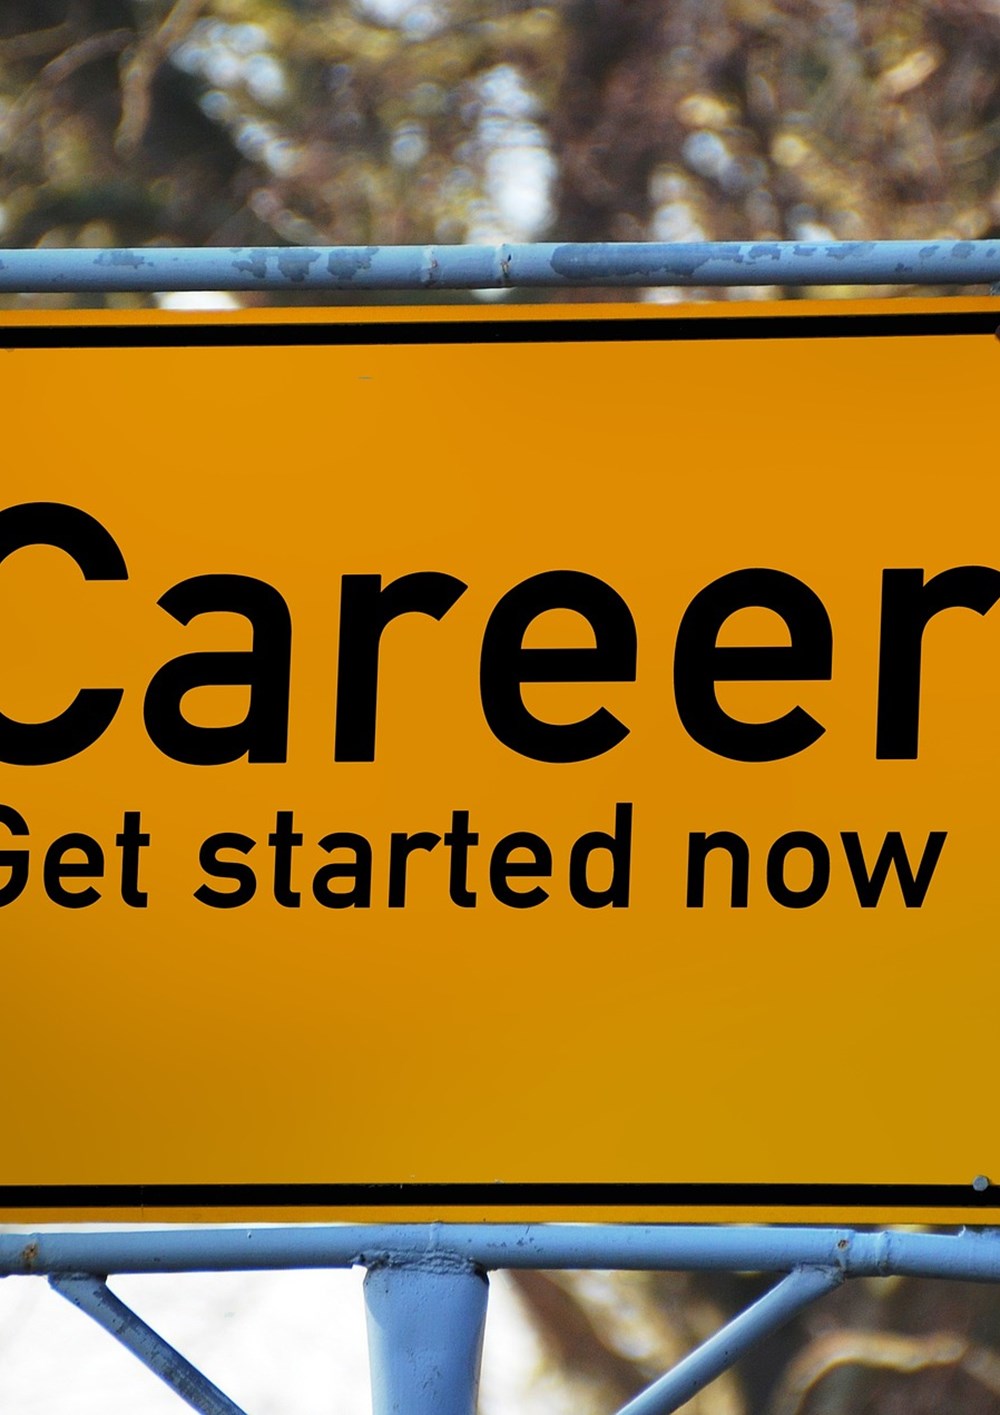 Sign showing Career - Get started now